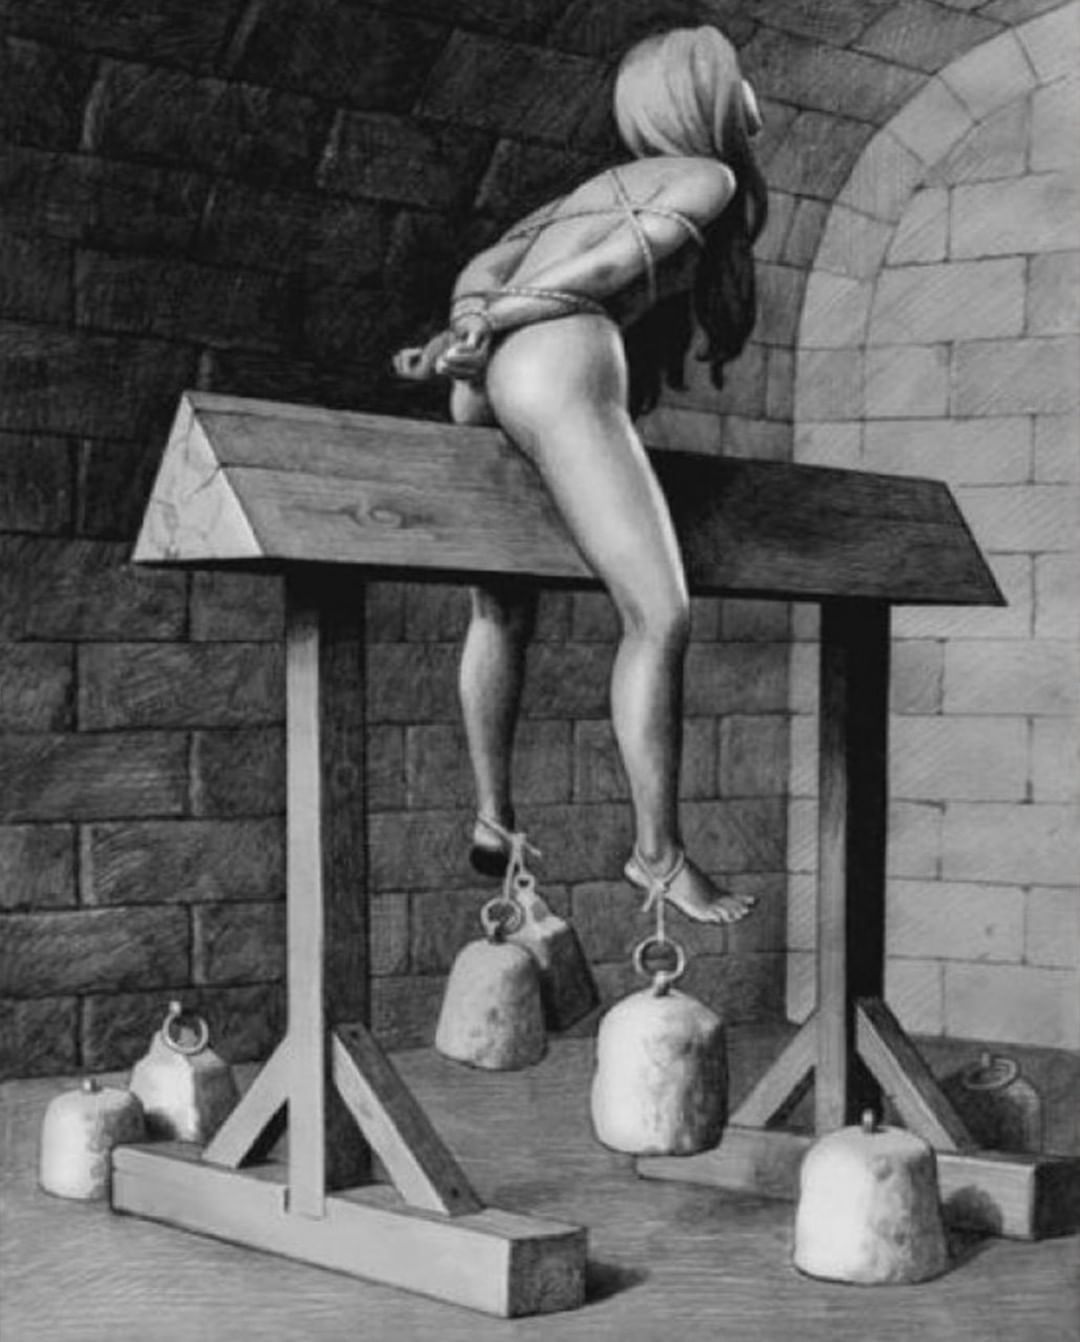 medieval era torture apparatus that was used in spain